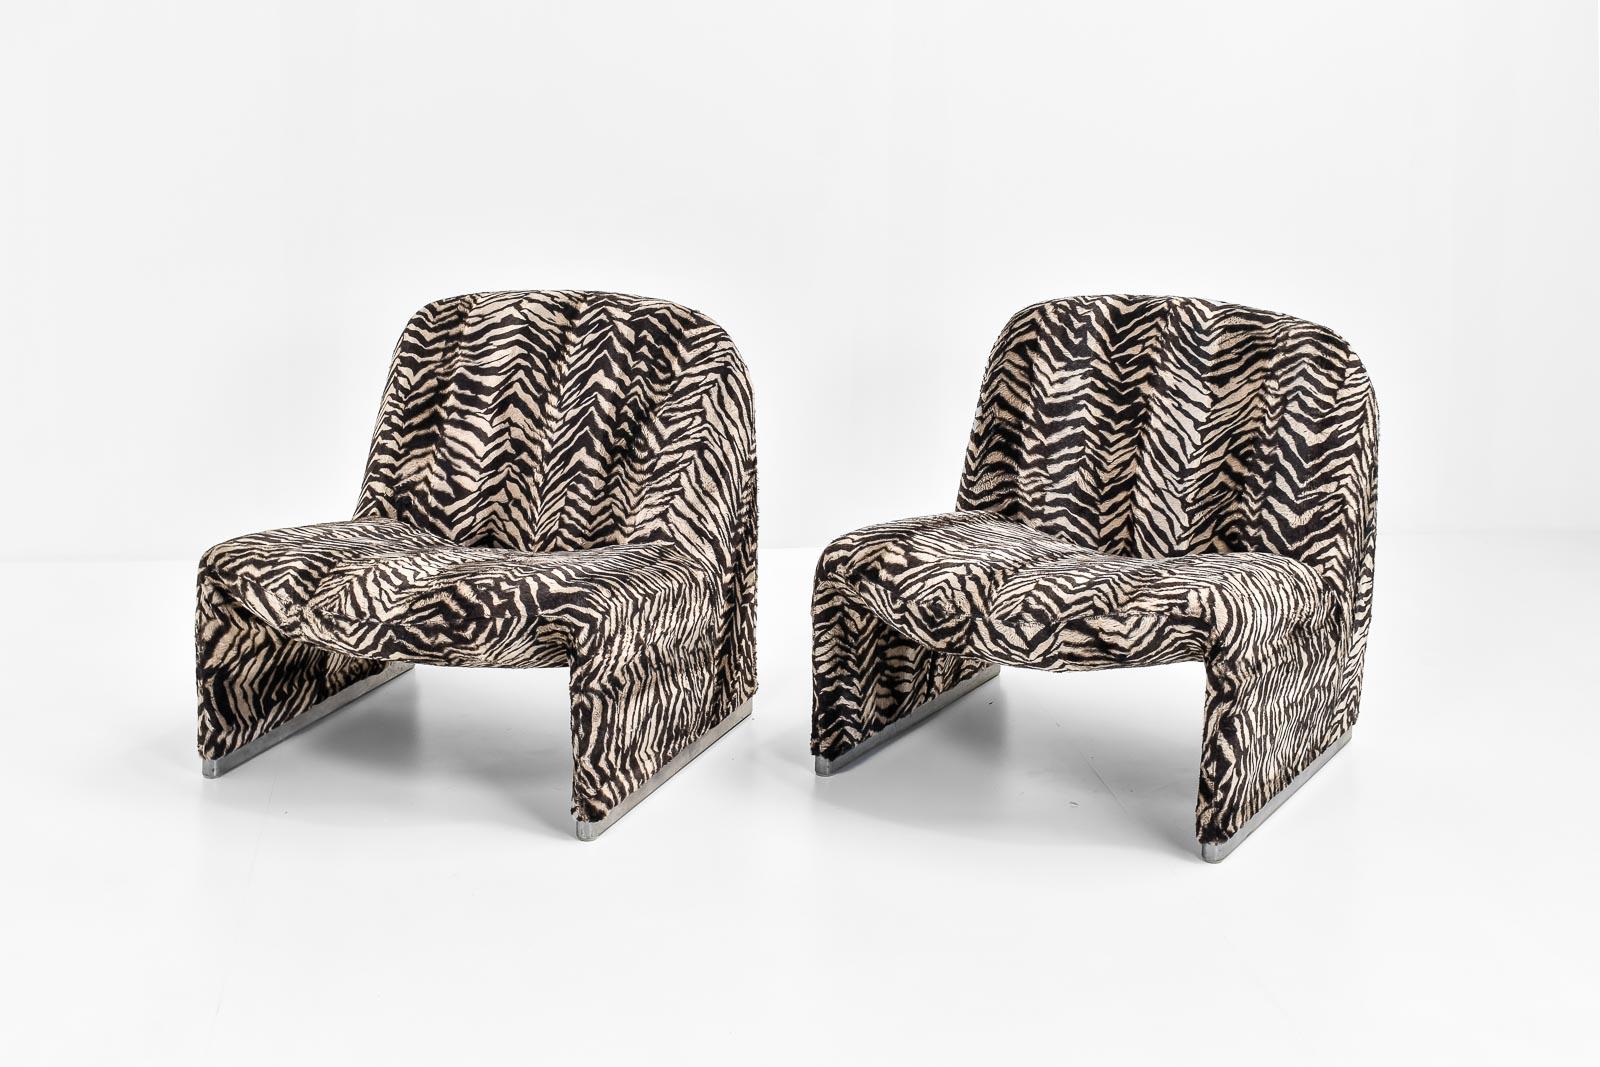 Mid-Century Modern Pair of Alky Chairs in Zebra Fabric by Giancarlo Piretti, 1970s